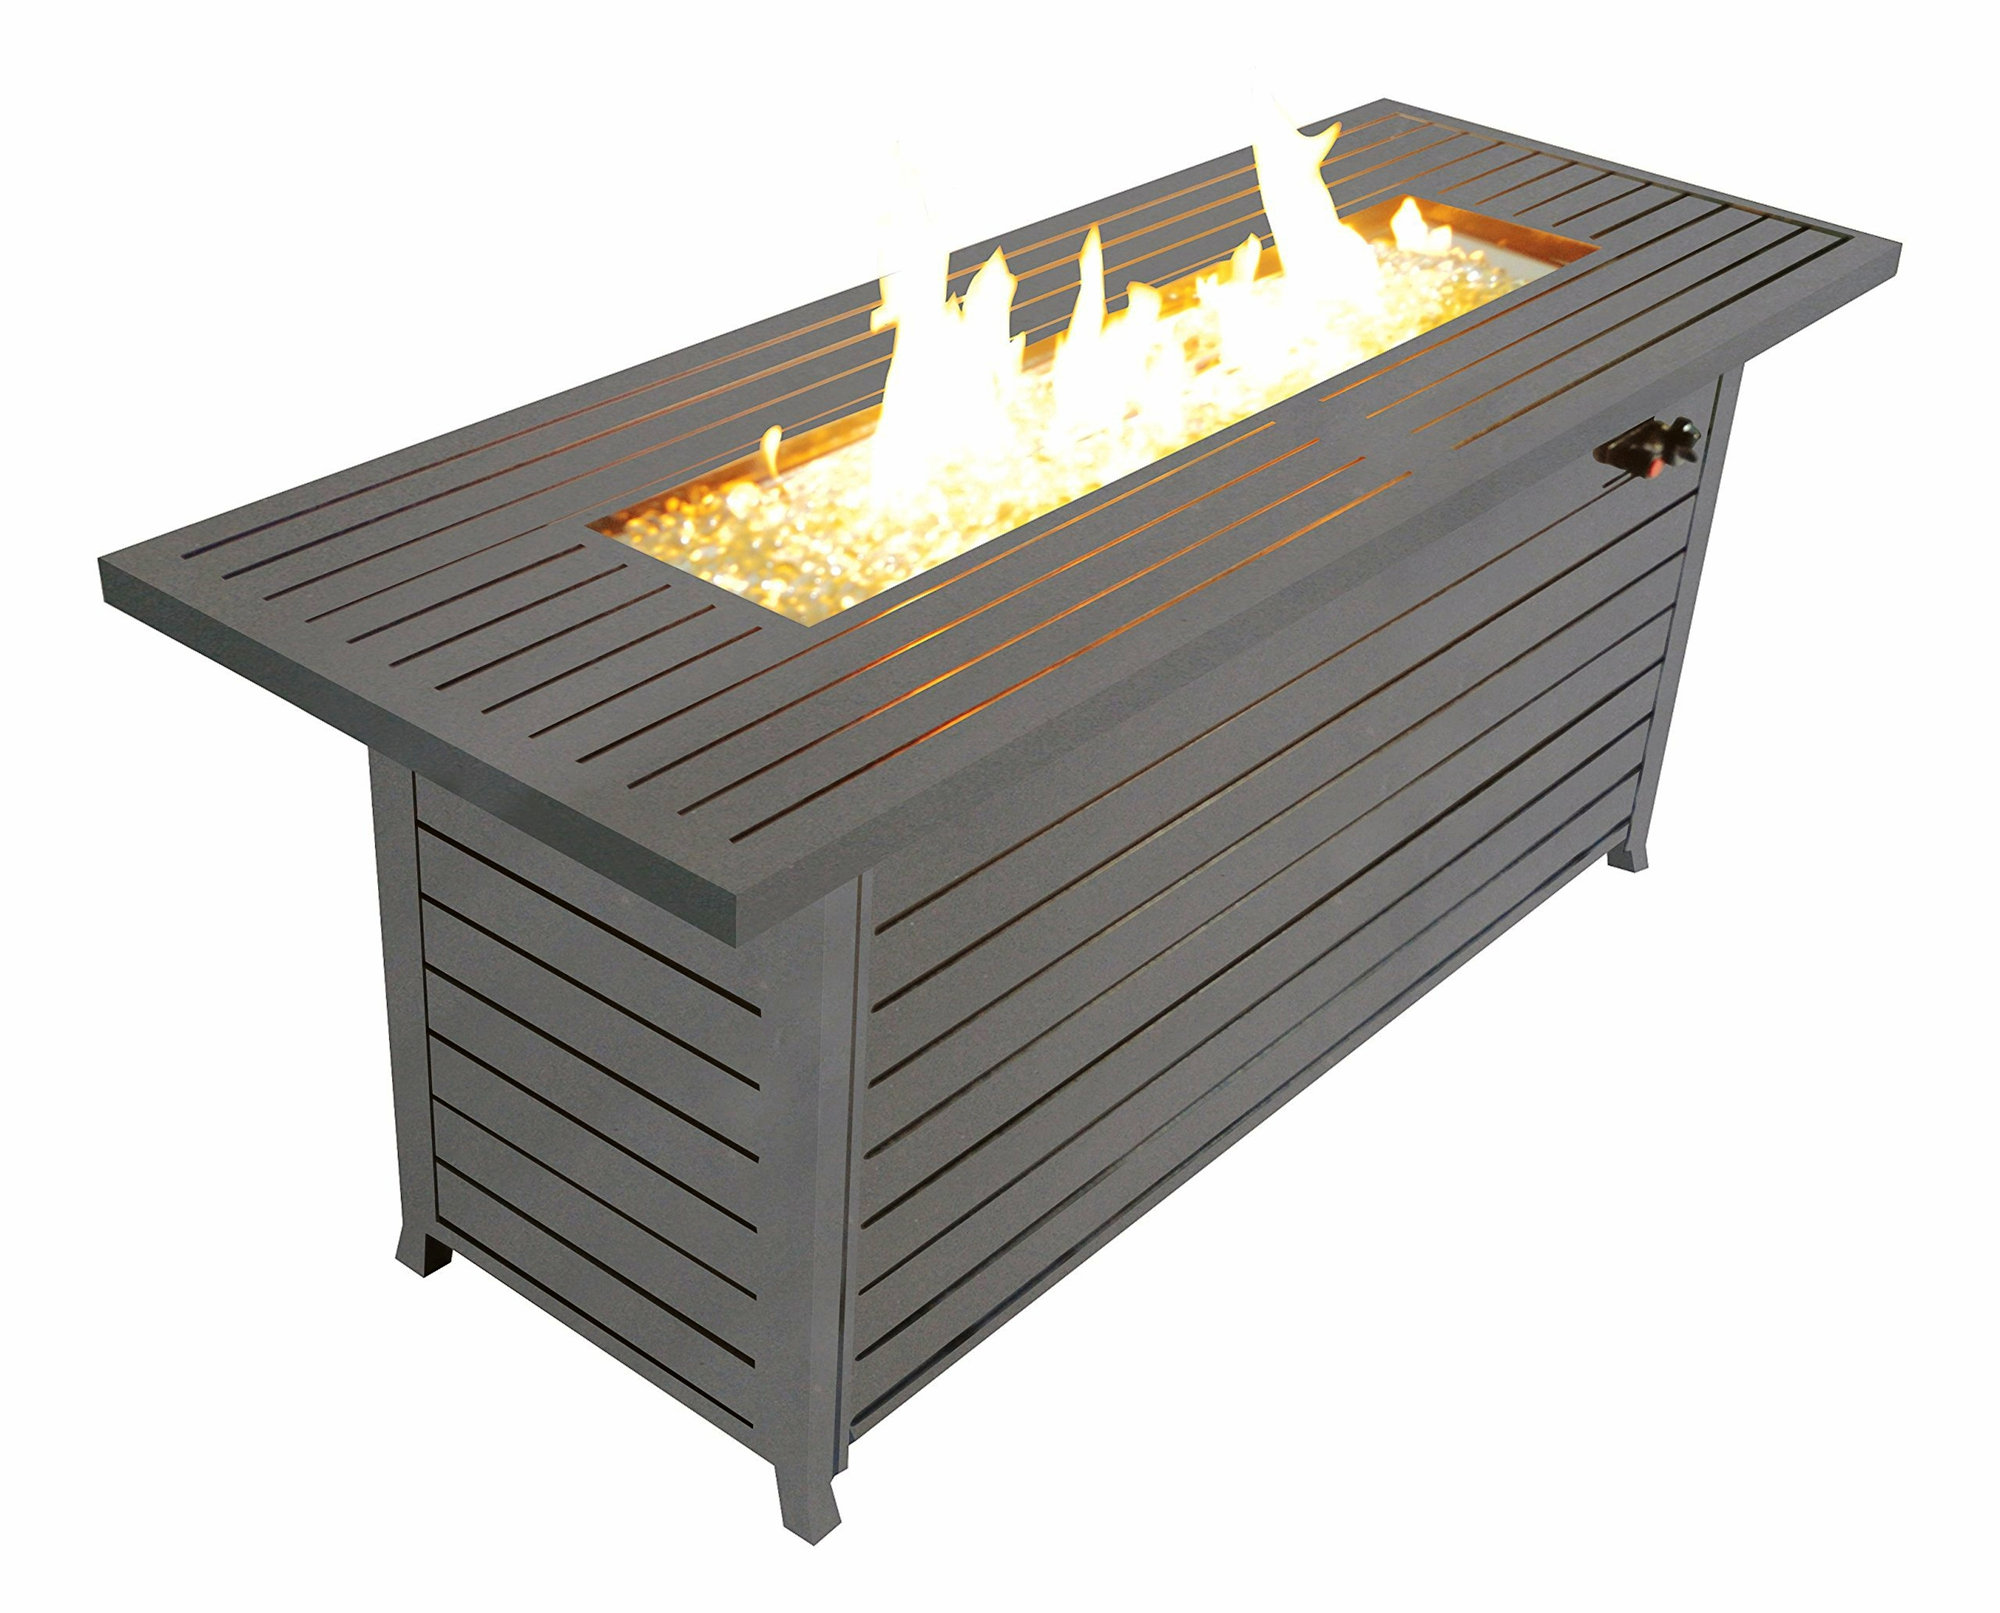 Arlmont & Co. Rosilind 24'' H x 56.7'' W Steel Propane Outdoor Fire Pit ...